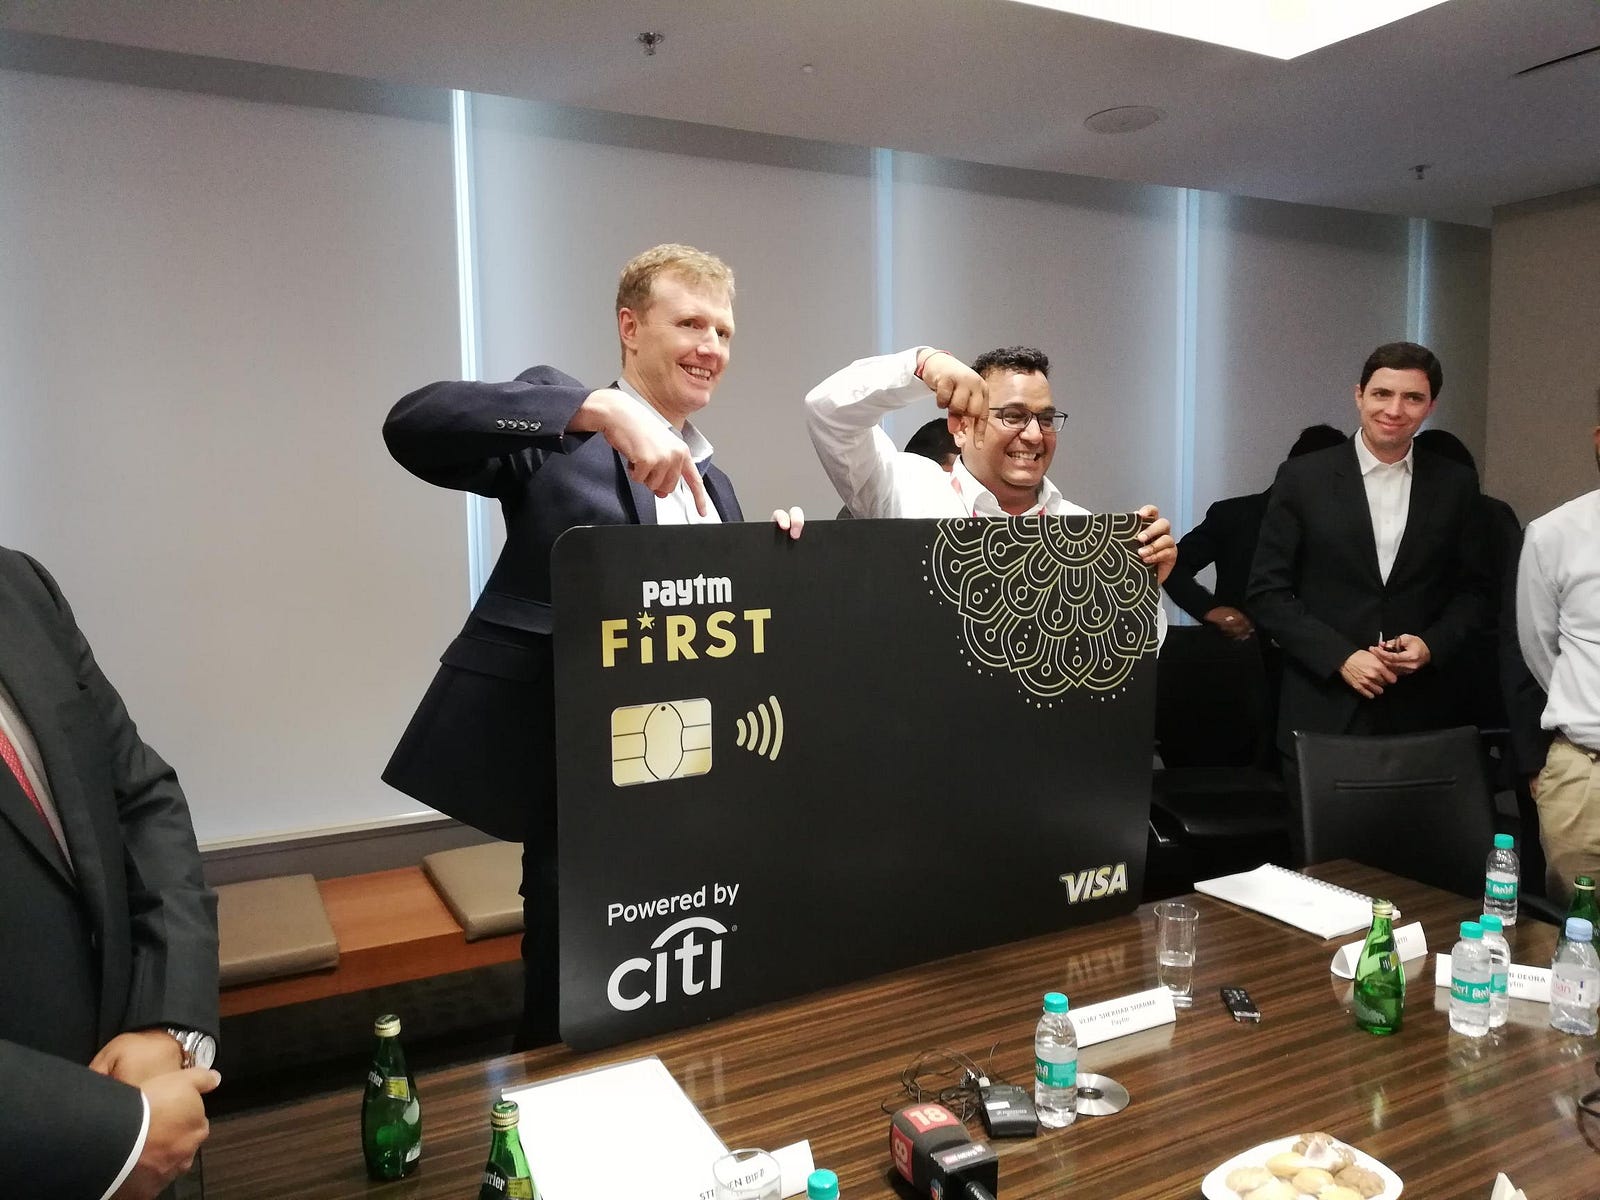 Paytm collaborated with Citibank to launch its 1st credit card called ‘Paytm First Card’